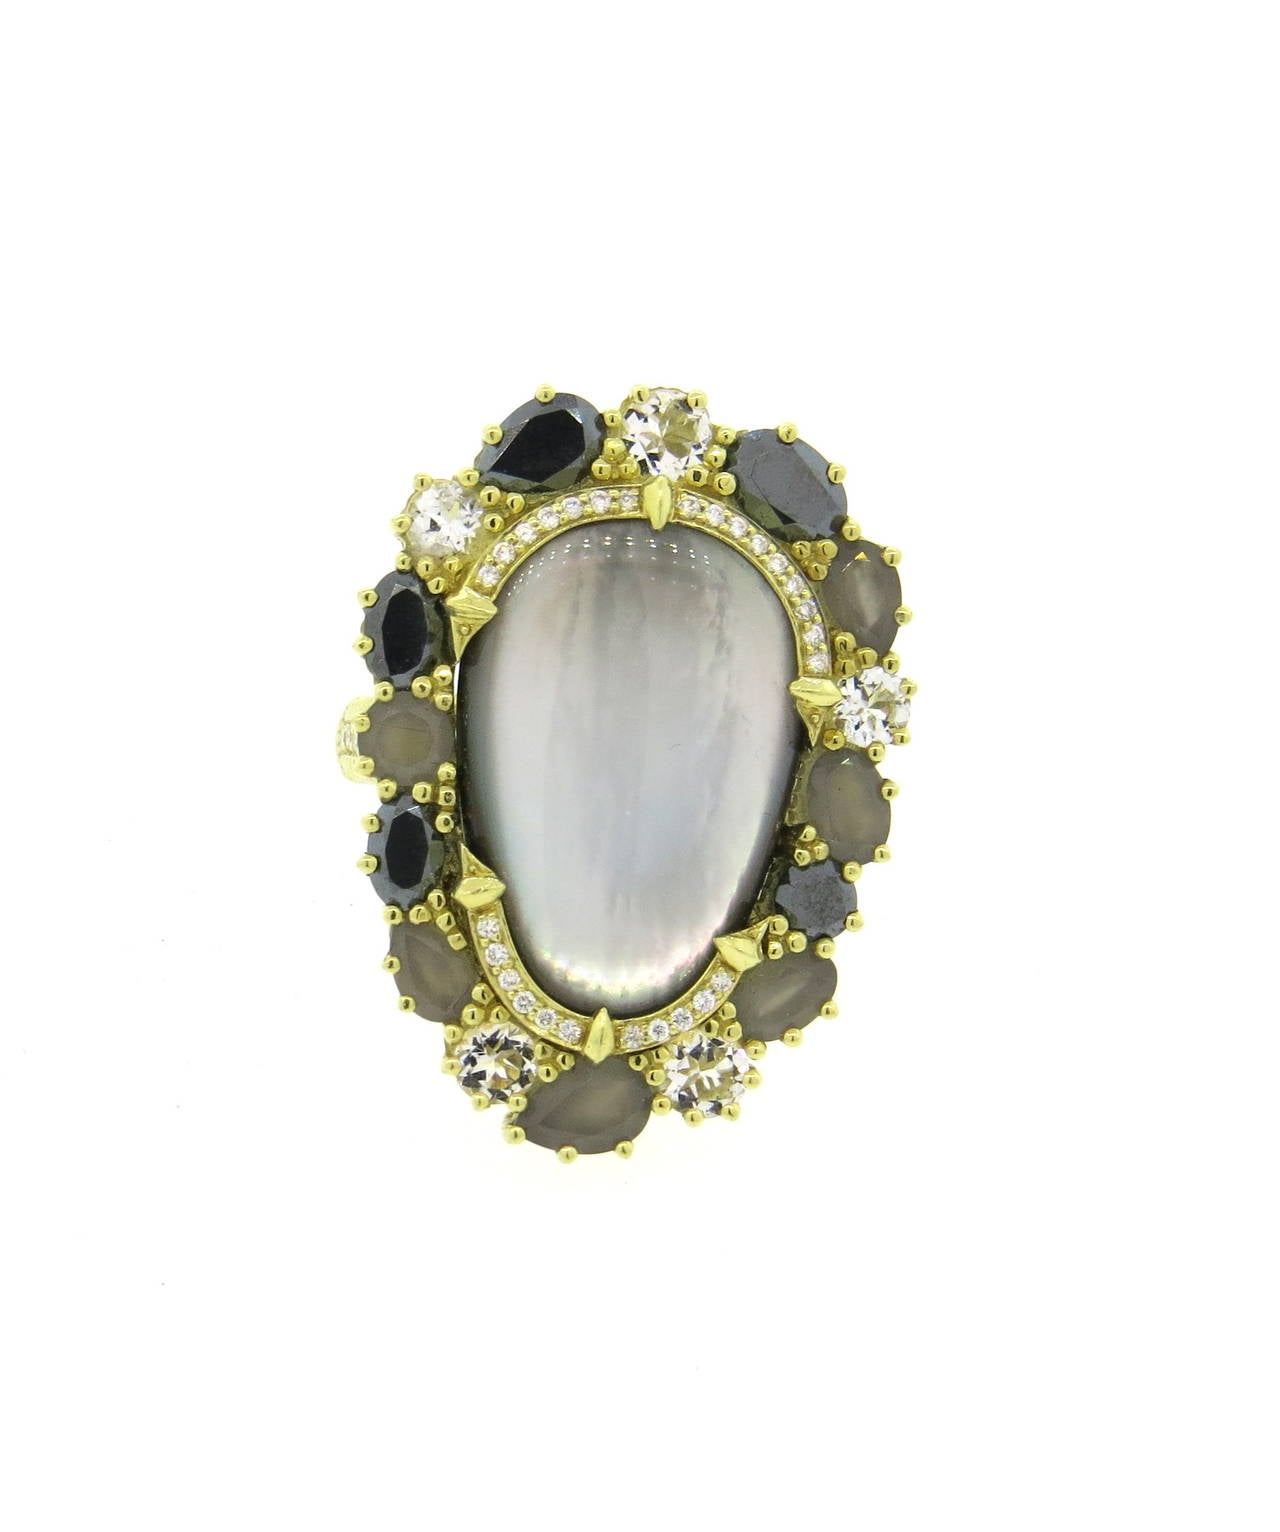 An 18k yellow gold ring set with a mother of pearl and quartz doublet, surrounded by black diamonds, quartz and gray moonstone.  The ring is also set with approximately 0.15ctw of G/VS diamonds.  Crafted by Judith Ripka, the ring is a size 7.  The